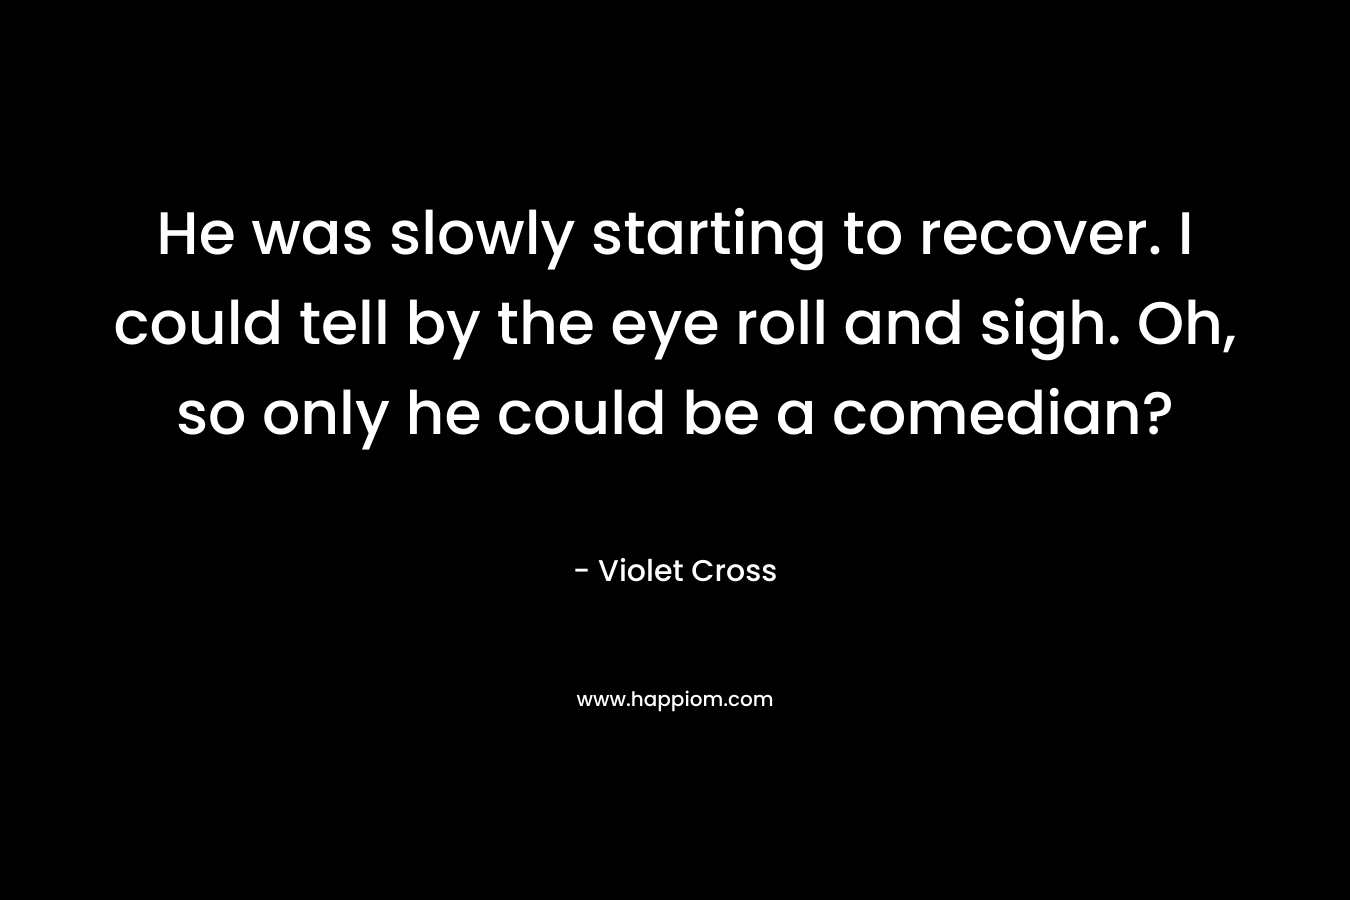 He was slowly starting to recover. I could tell by the eye roll and sigh. Oh, so only he could be a comedian? – Violet Cross